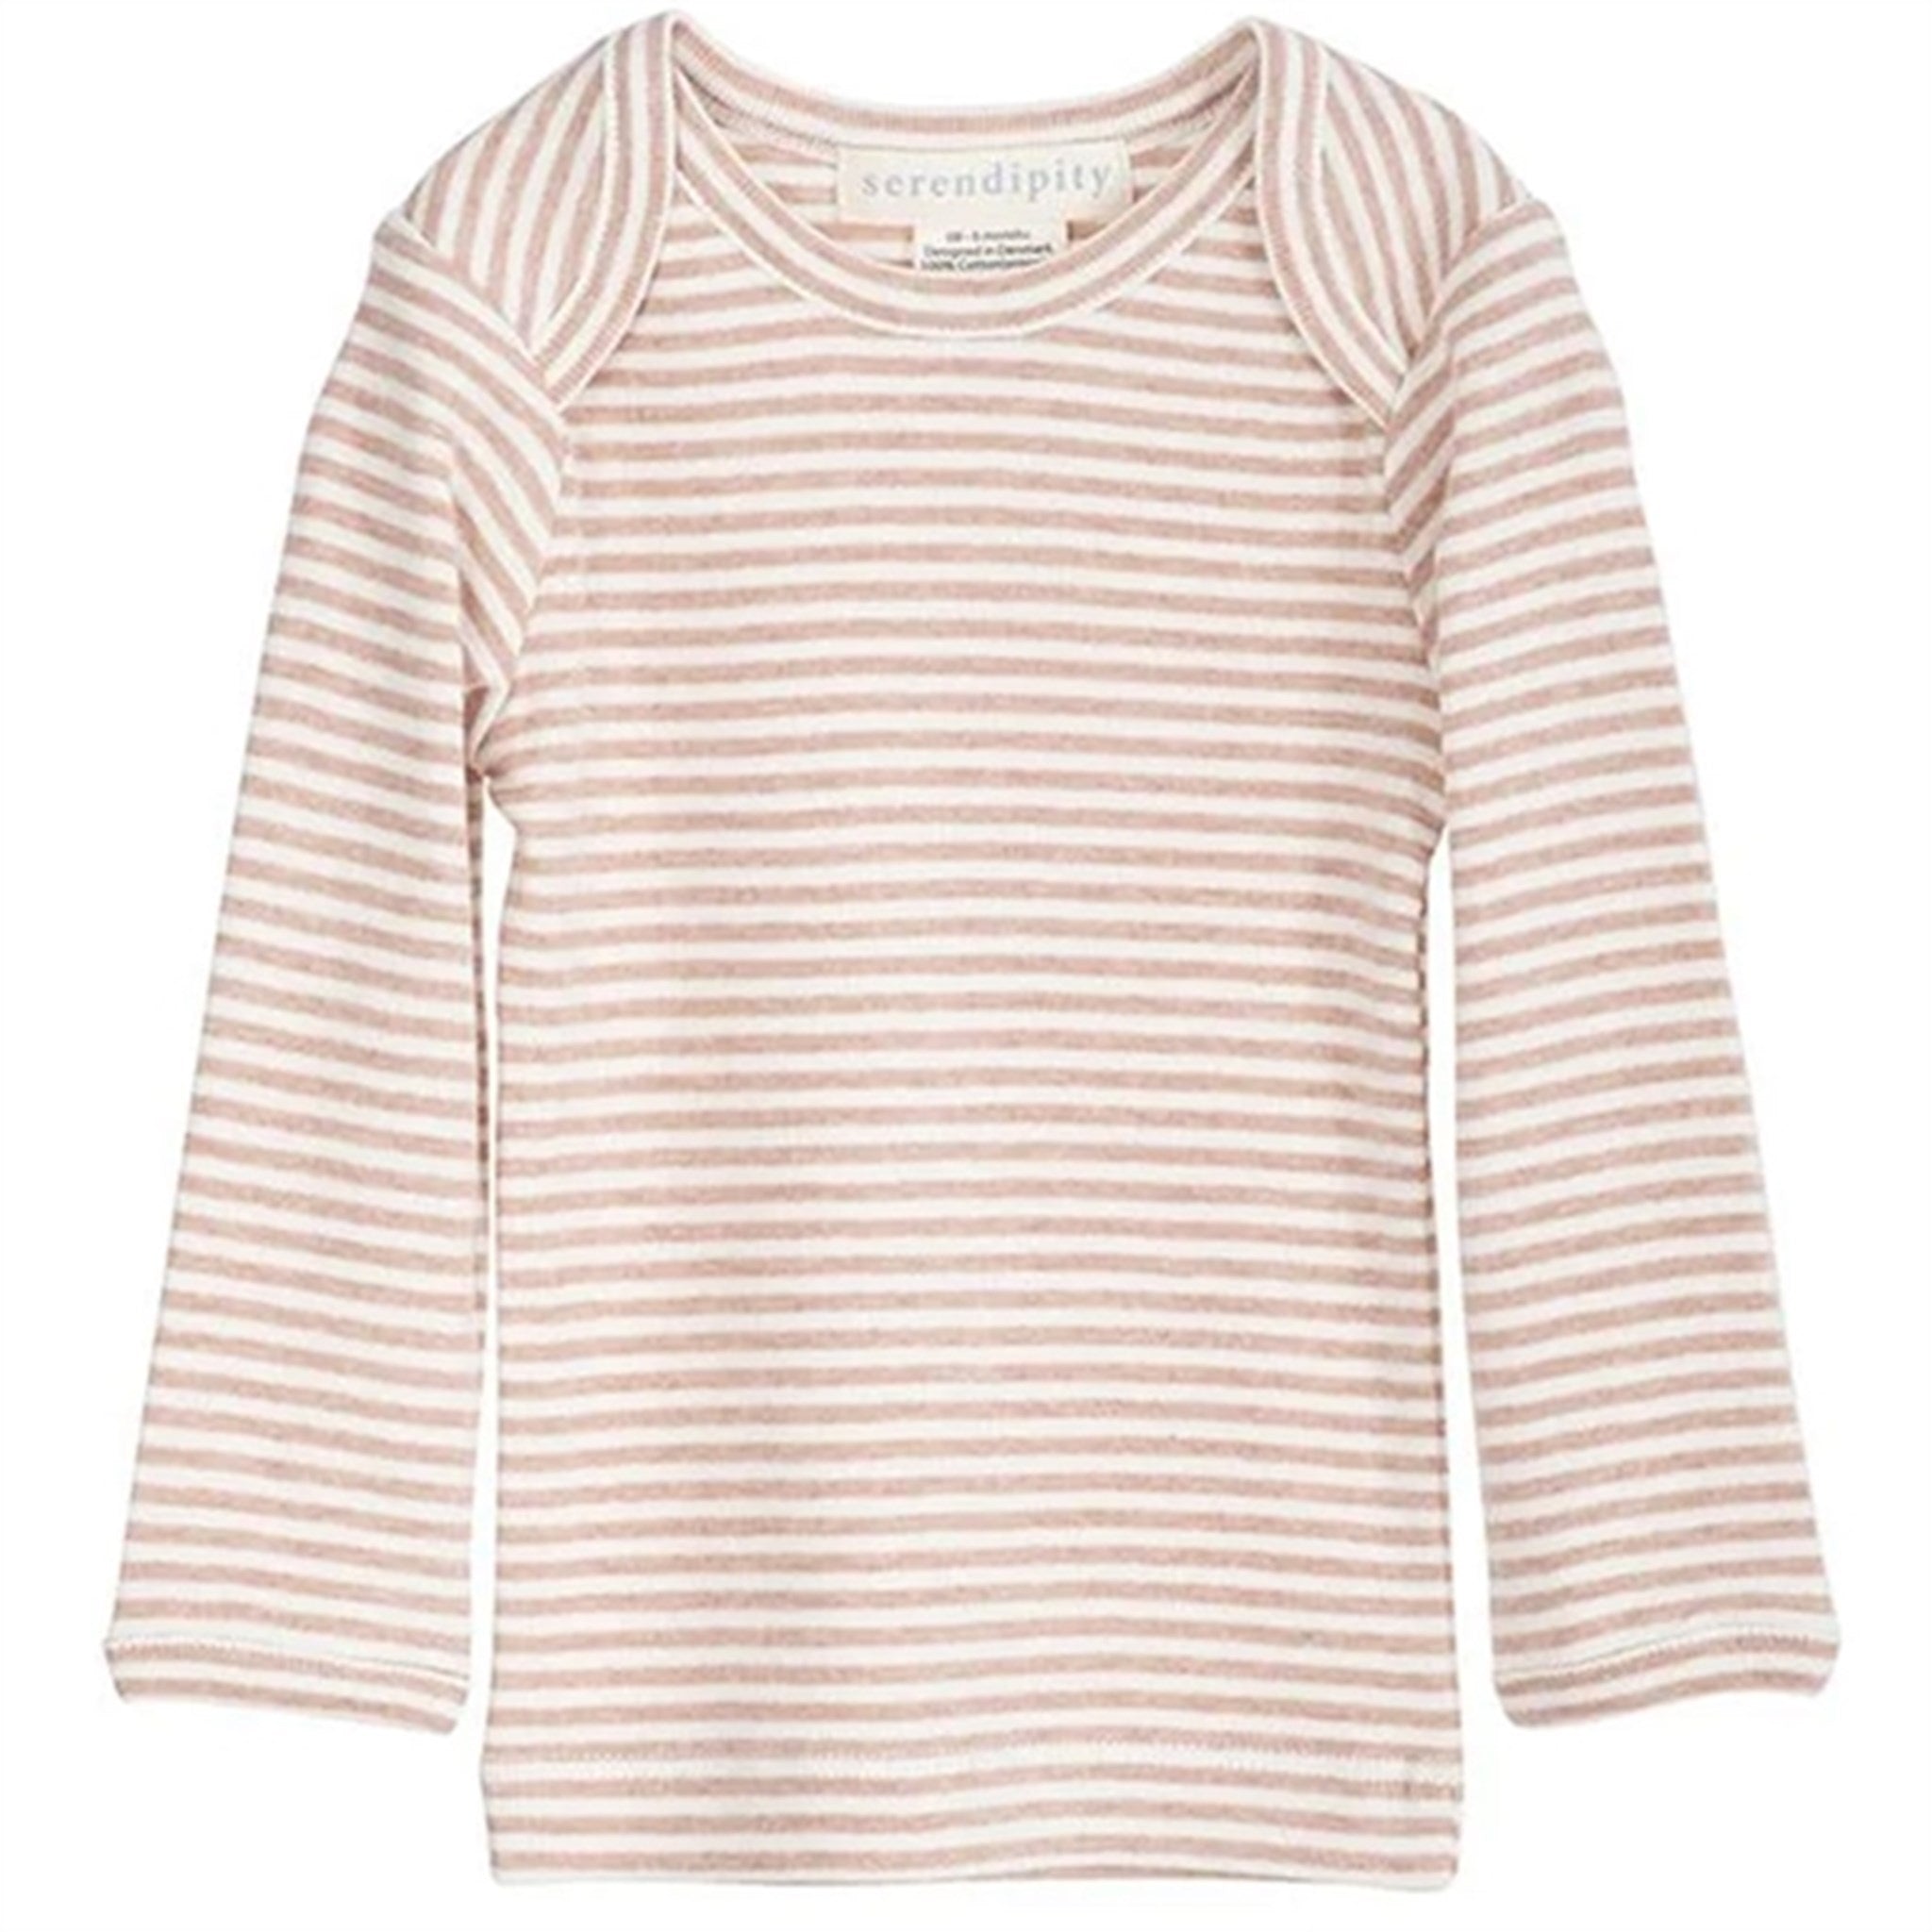 Serendipity Clay/Offwhite Rib Baby Tee Stripe Bluse